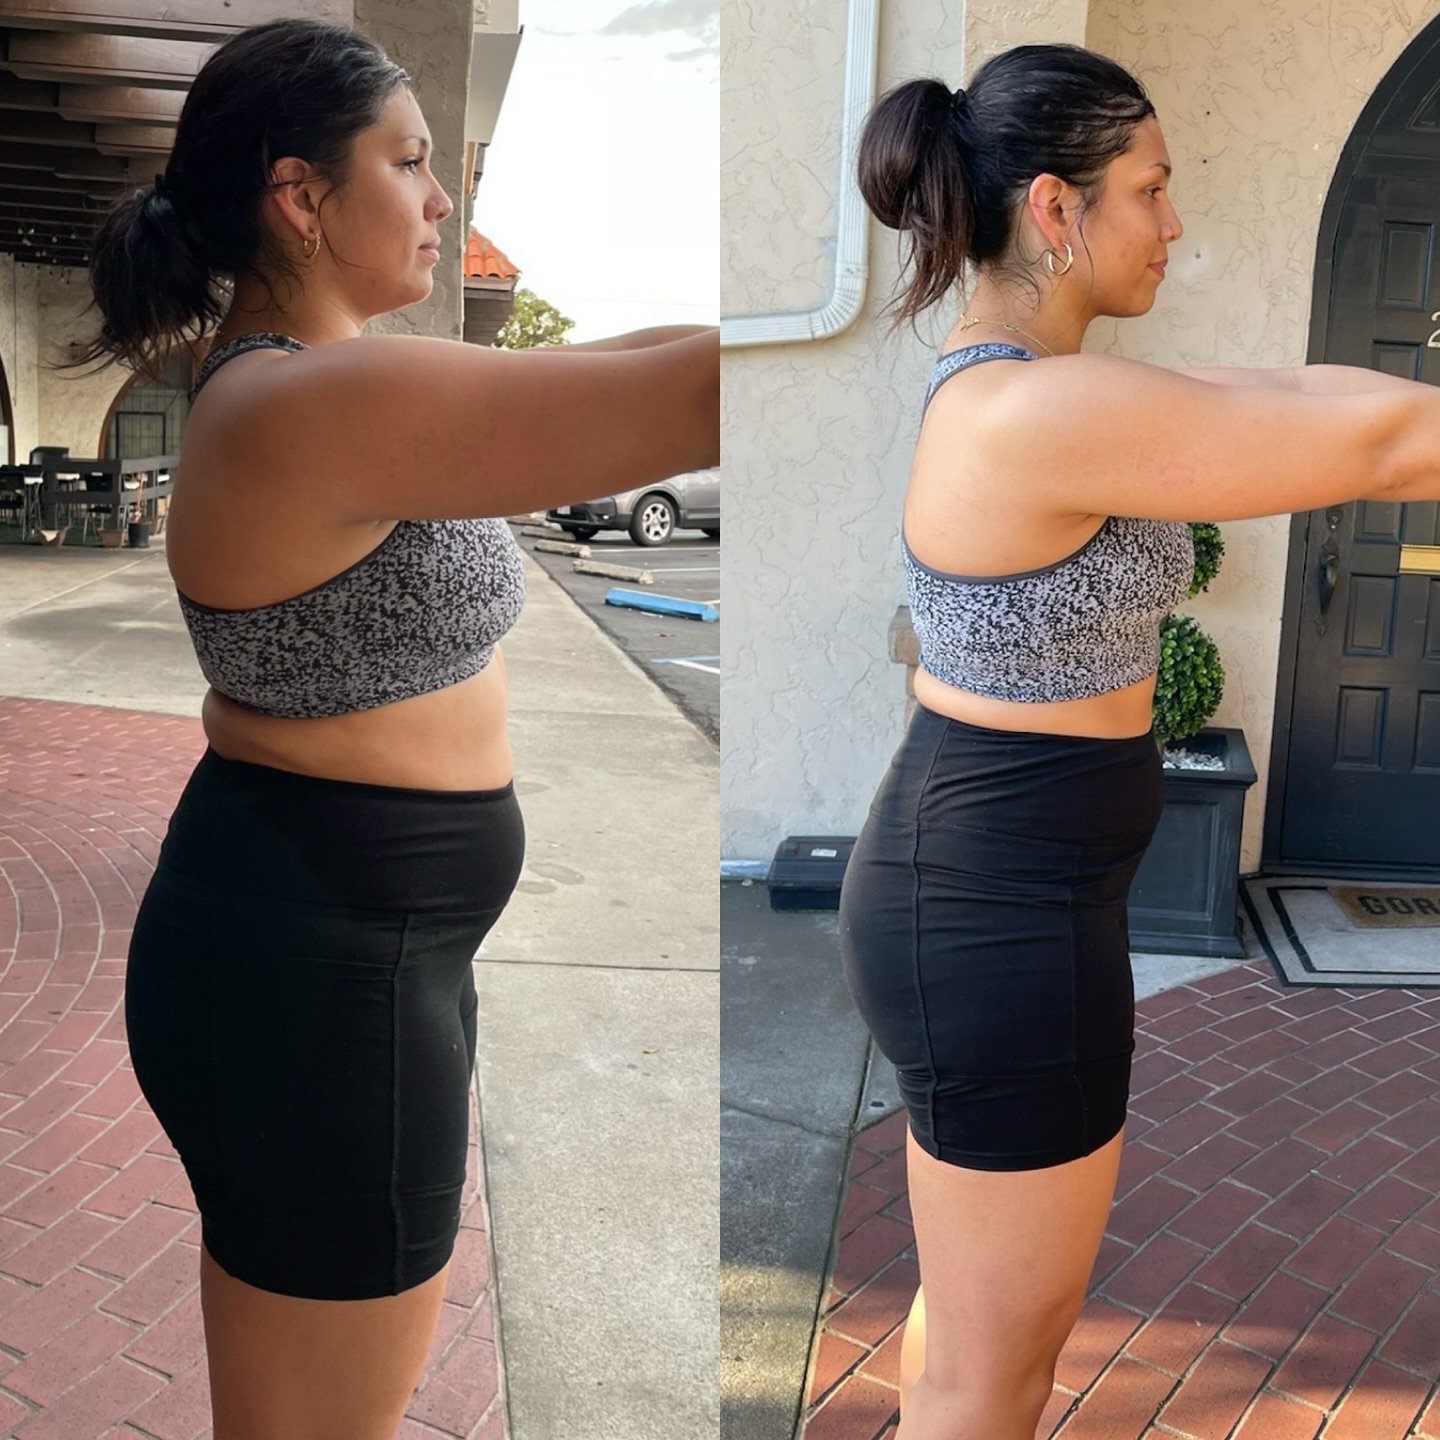 Our client&rsquo;s dedication led to a remarkable 25lb weight loss journey. We are so proud of you @elva.aa, keep inspiring and blessing us with your positive attitude. 👏🏼💗

#BodiedBabe #FitnessGoals #SanJoseGyms